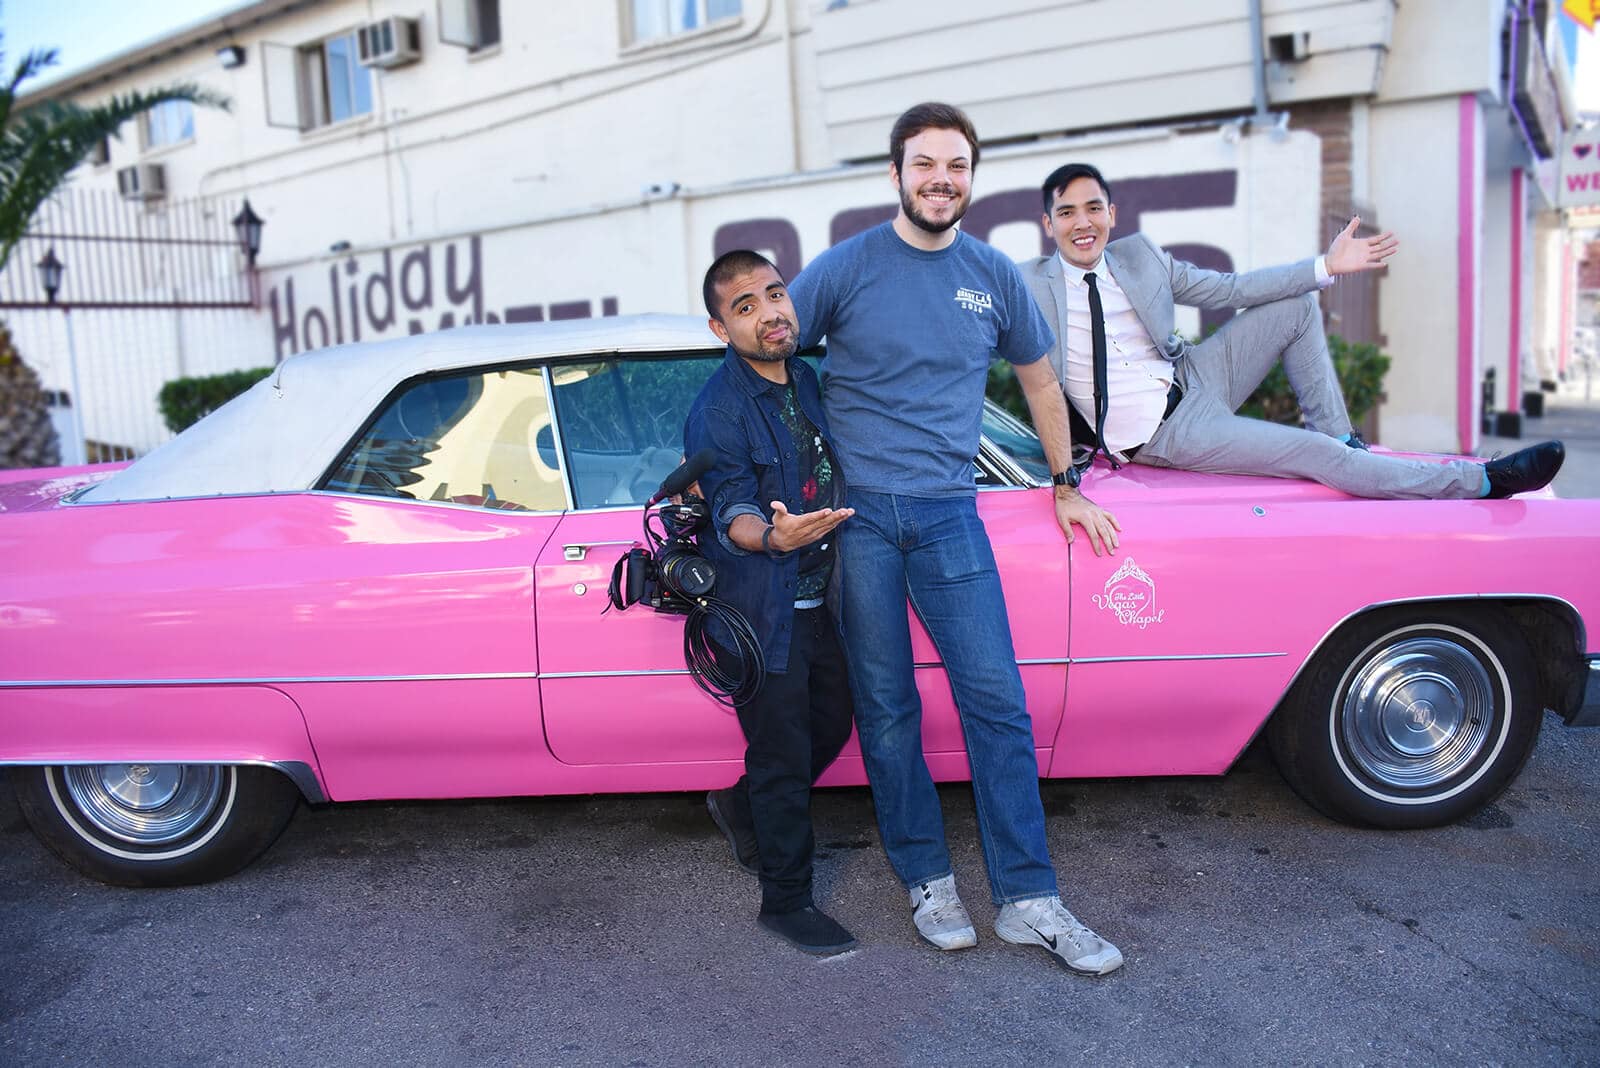 buzzfeed gets married team poses with iconic pink cadillac